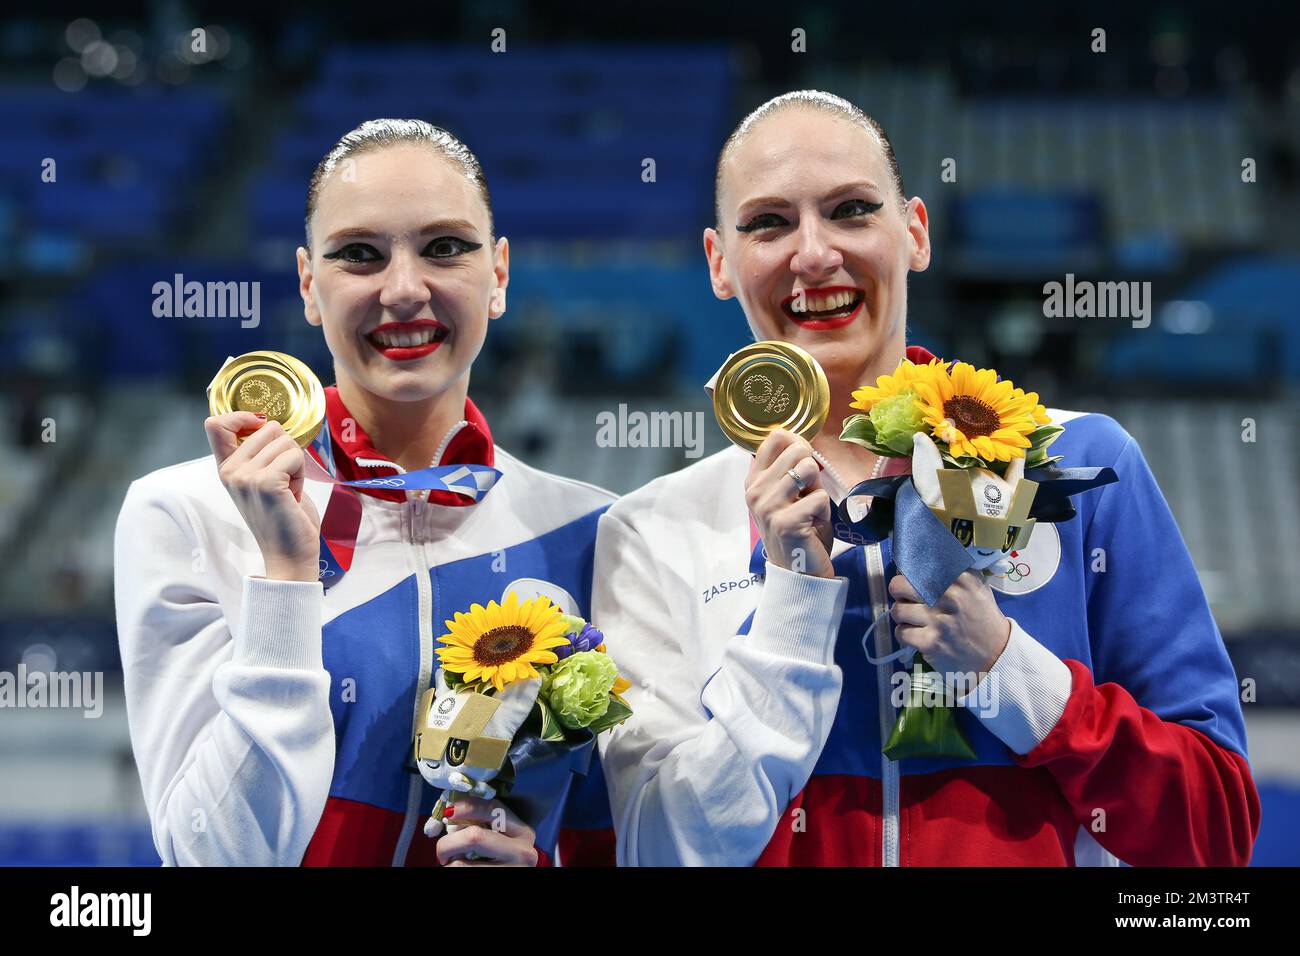 AUG 4, 2021 - TOKYO, JAPAN: Svetlana ROMASHINA and Svetlana KOLESNICHENKO of Russia win the Gold Medal in the Artistic Swimming Duet at the Tokyo 2020 Olympic Games (Photo by Mickael Chavet/RX) Stock Photo